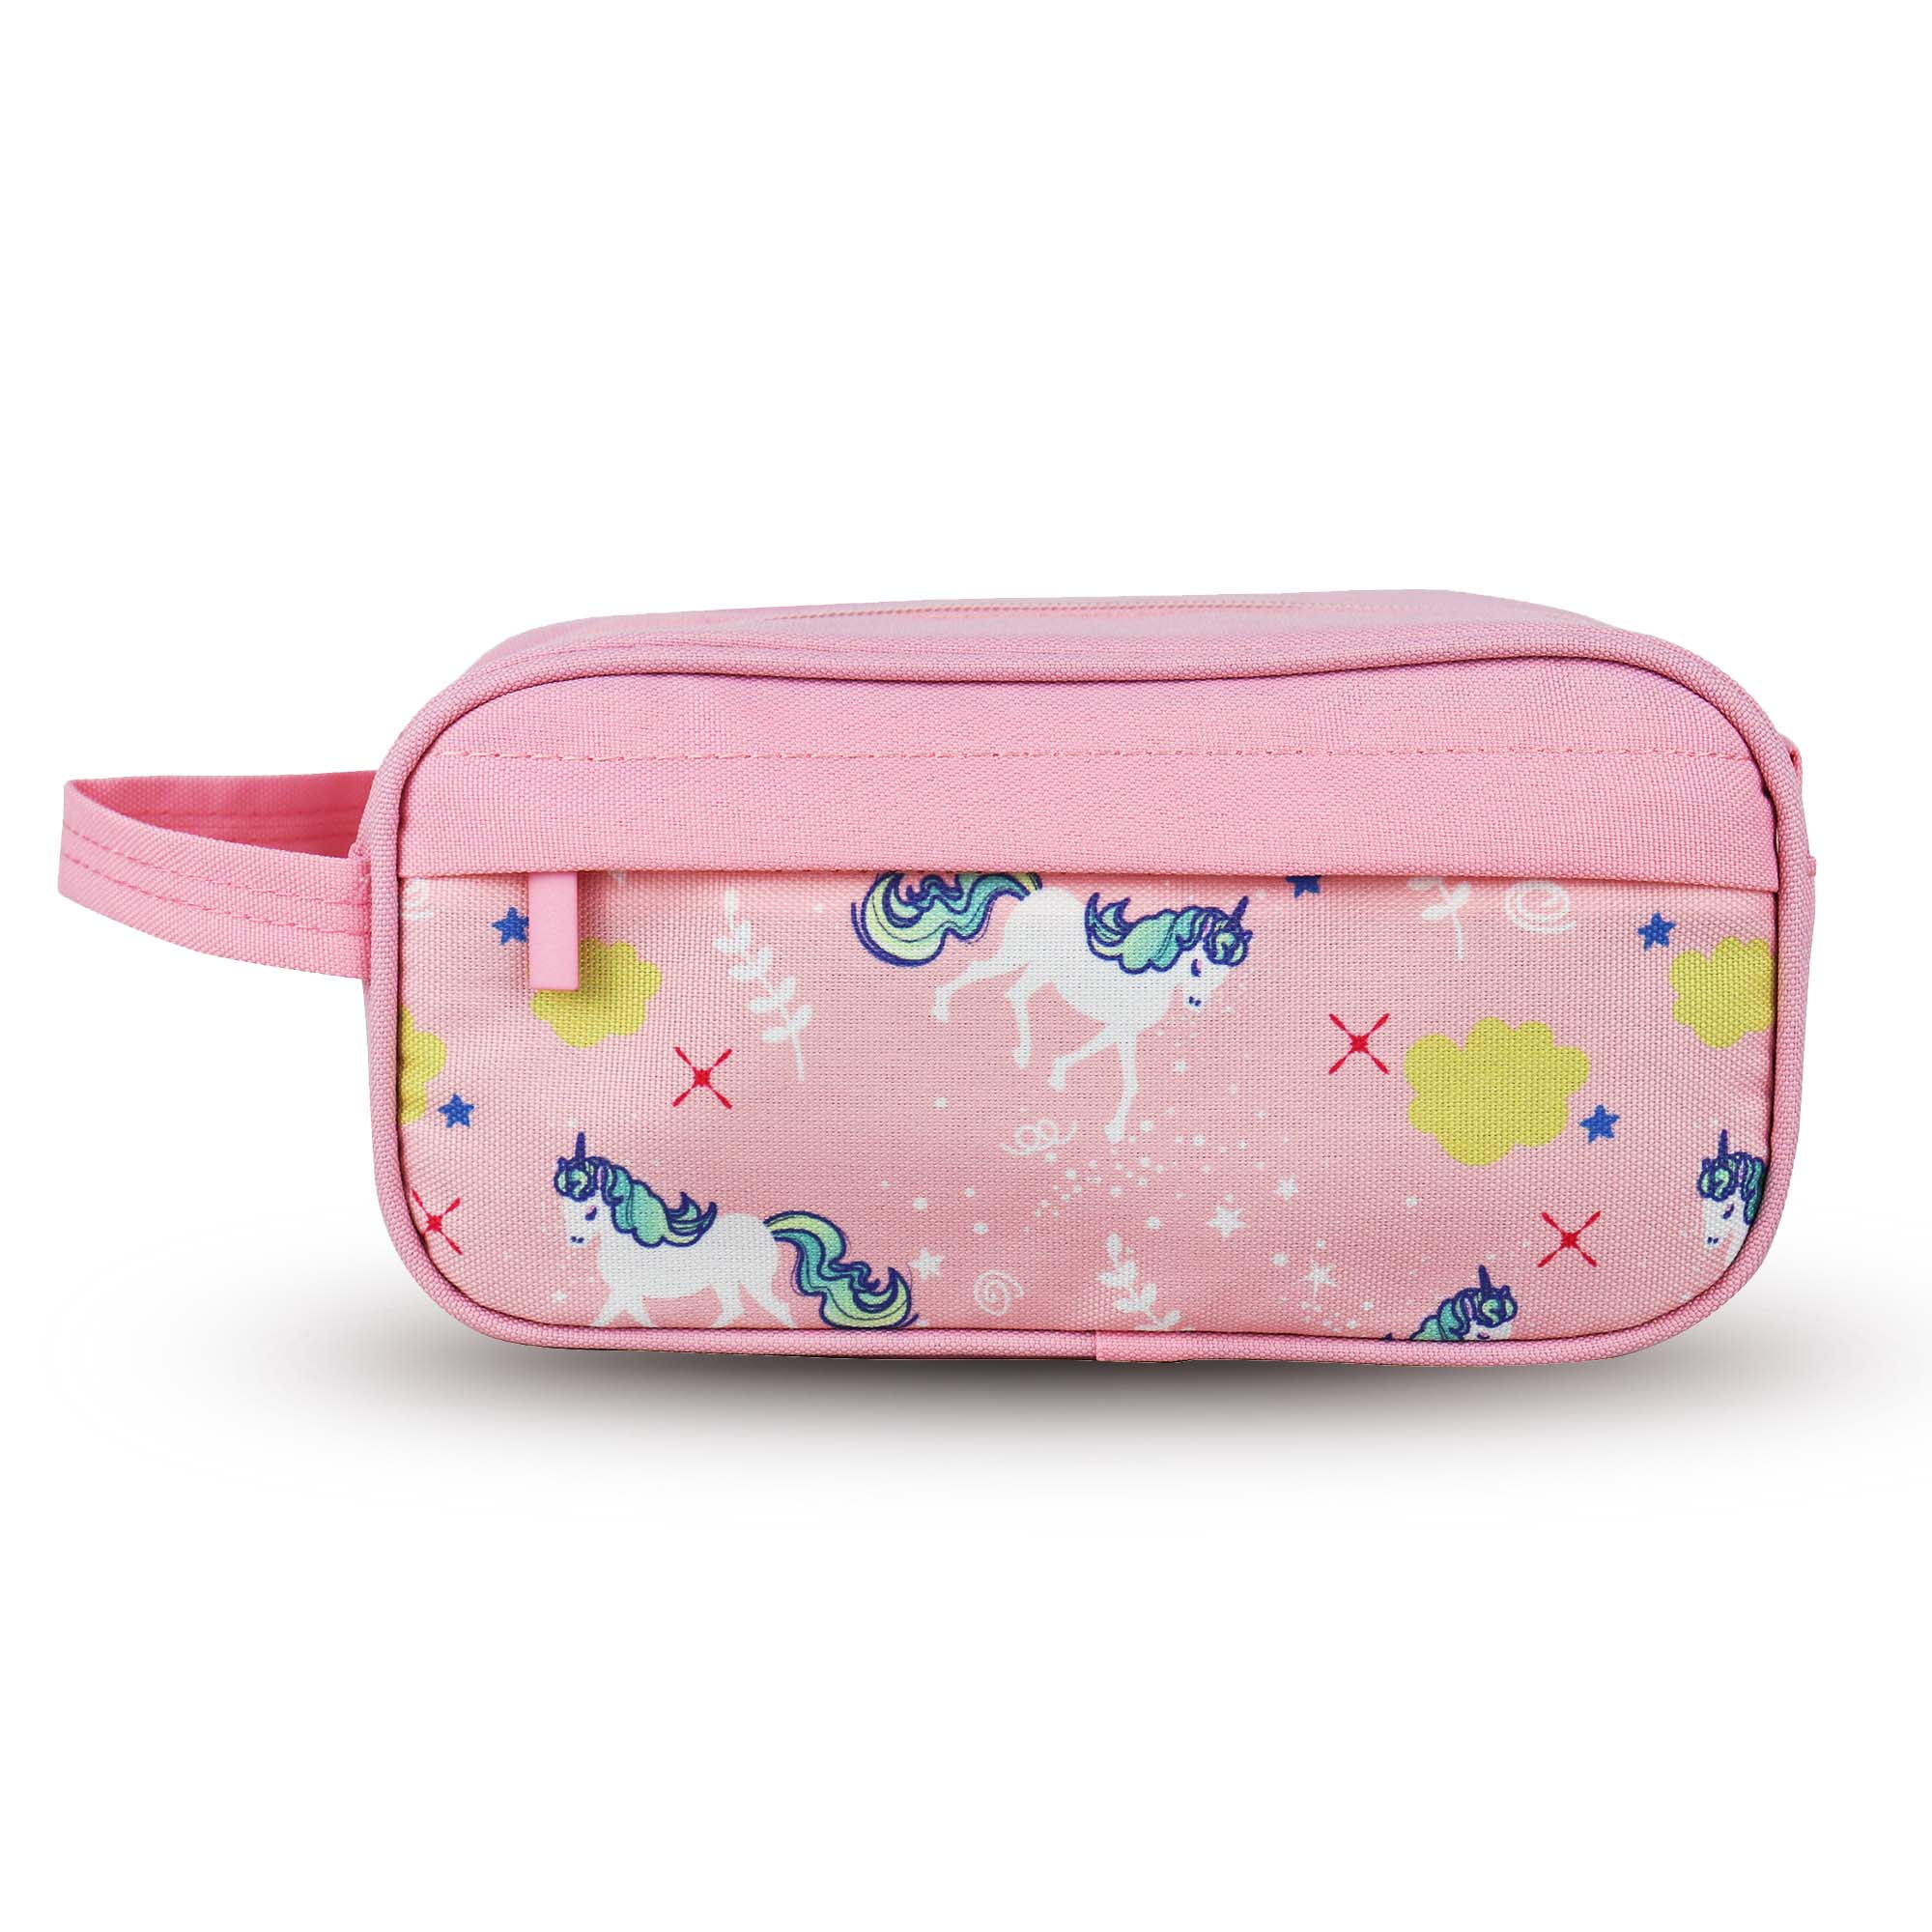 Pery Vivid & Handy Pencil Case And Pen Holder For Girls and Boys With  Smooth Zipper System For Carrying Useful Stationery Item, Best For Birthday  Gift